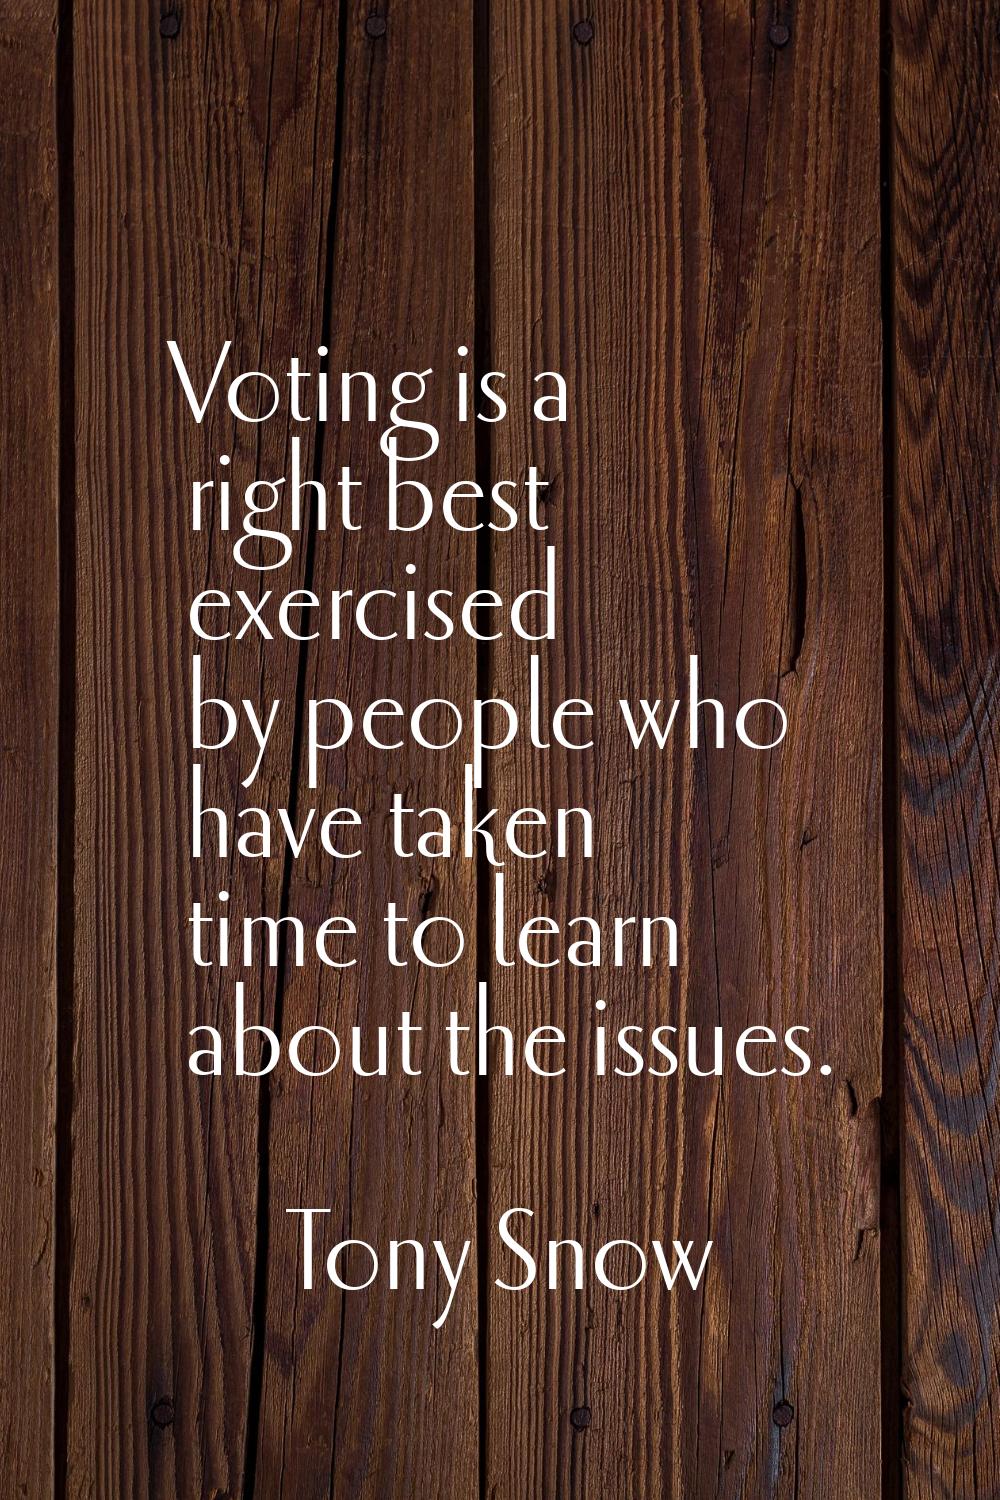 Voting is a right best exercised by people who have taken time to learn about the issues.